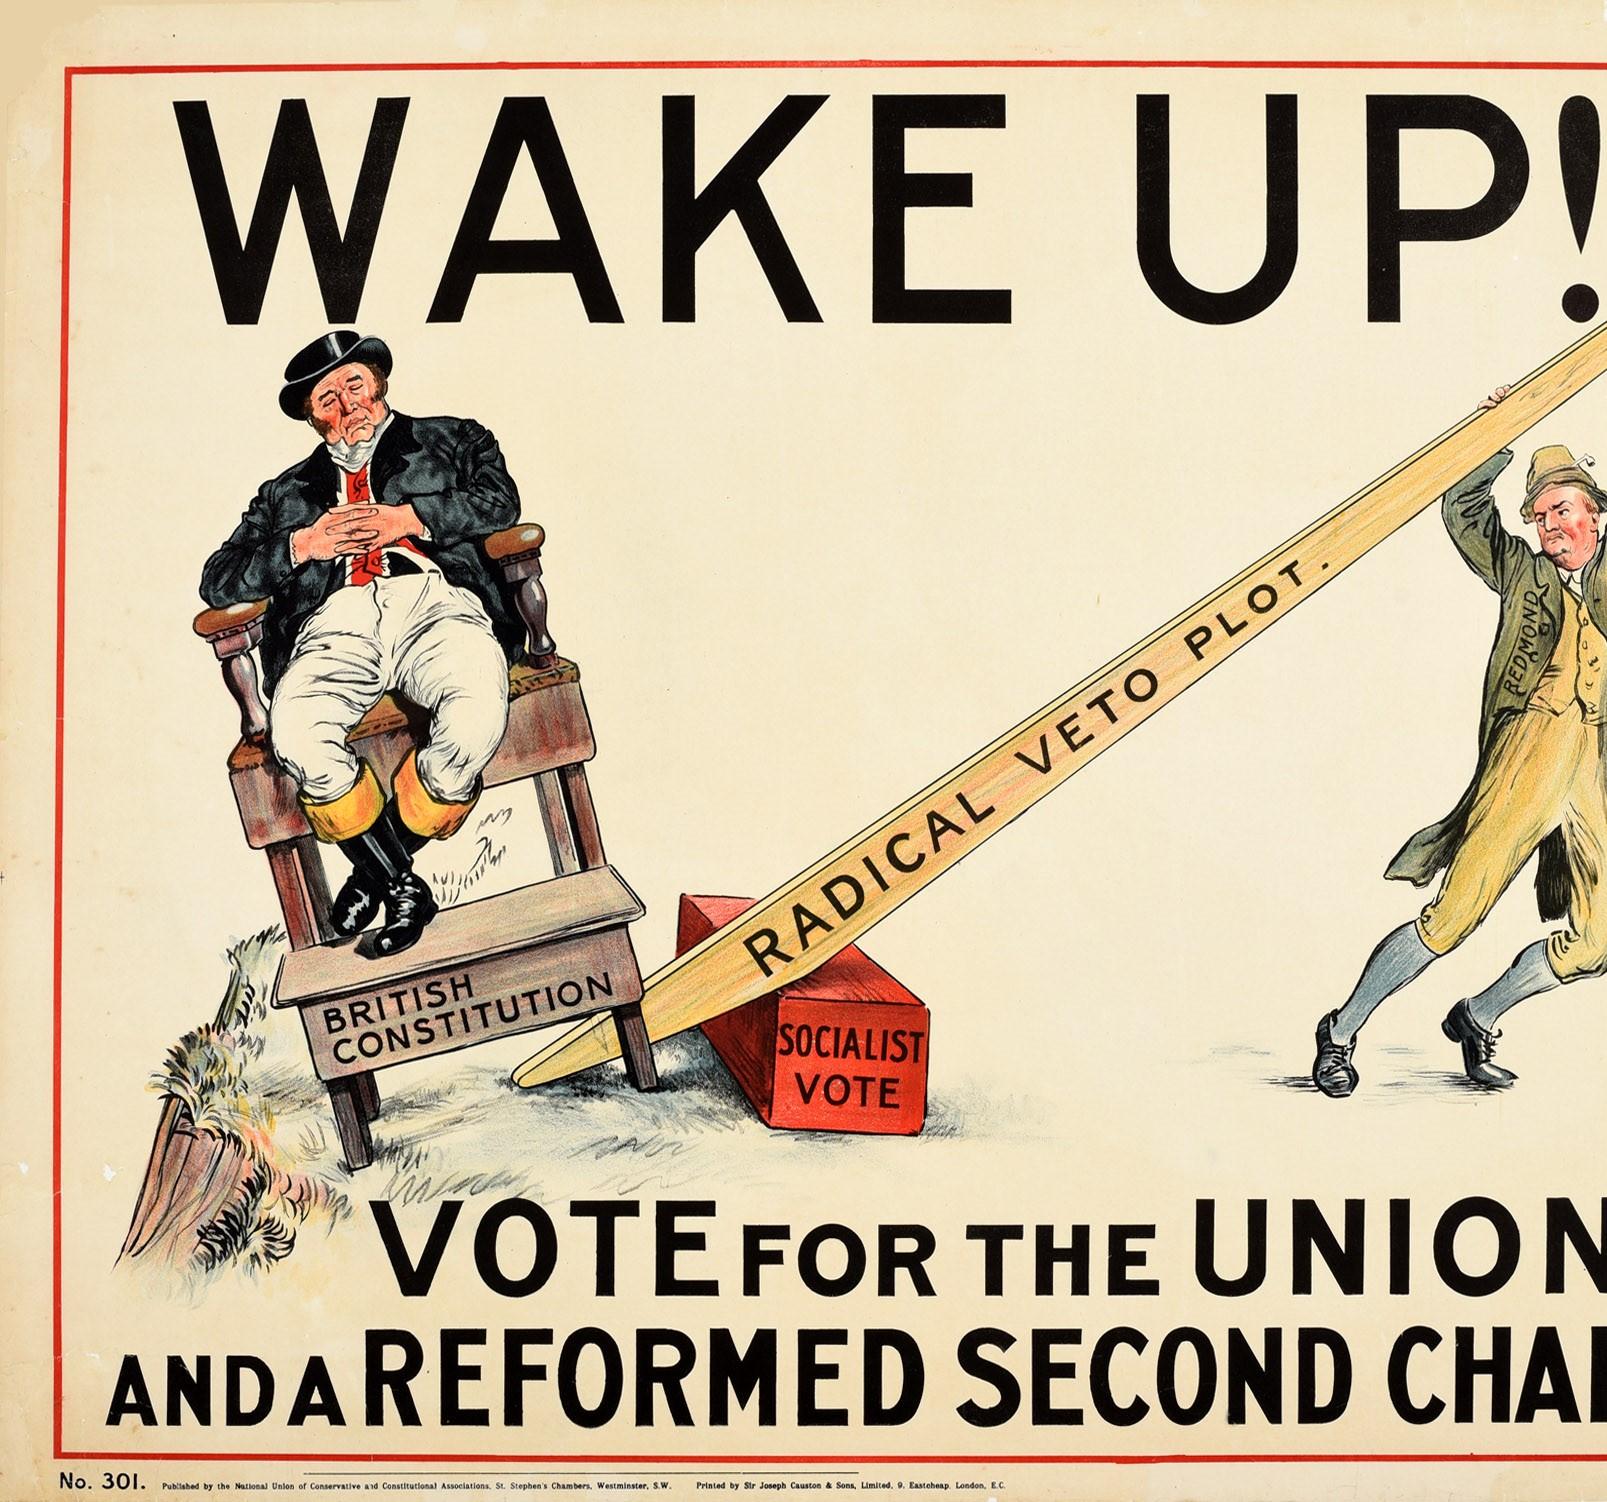 Original Antique Election Poster Wake Up Vote Unionist Conservative John Bull - Print by Unknown